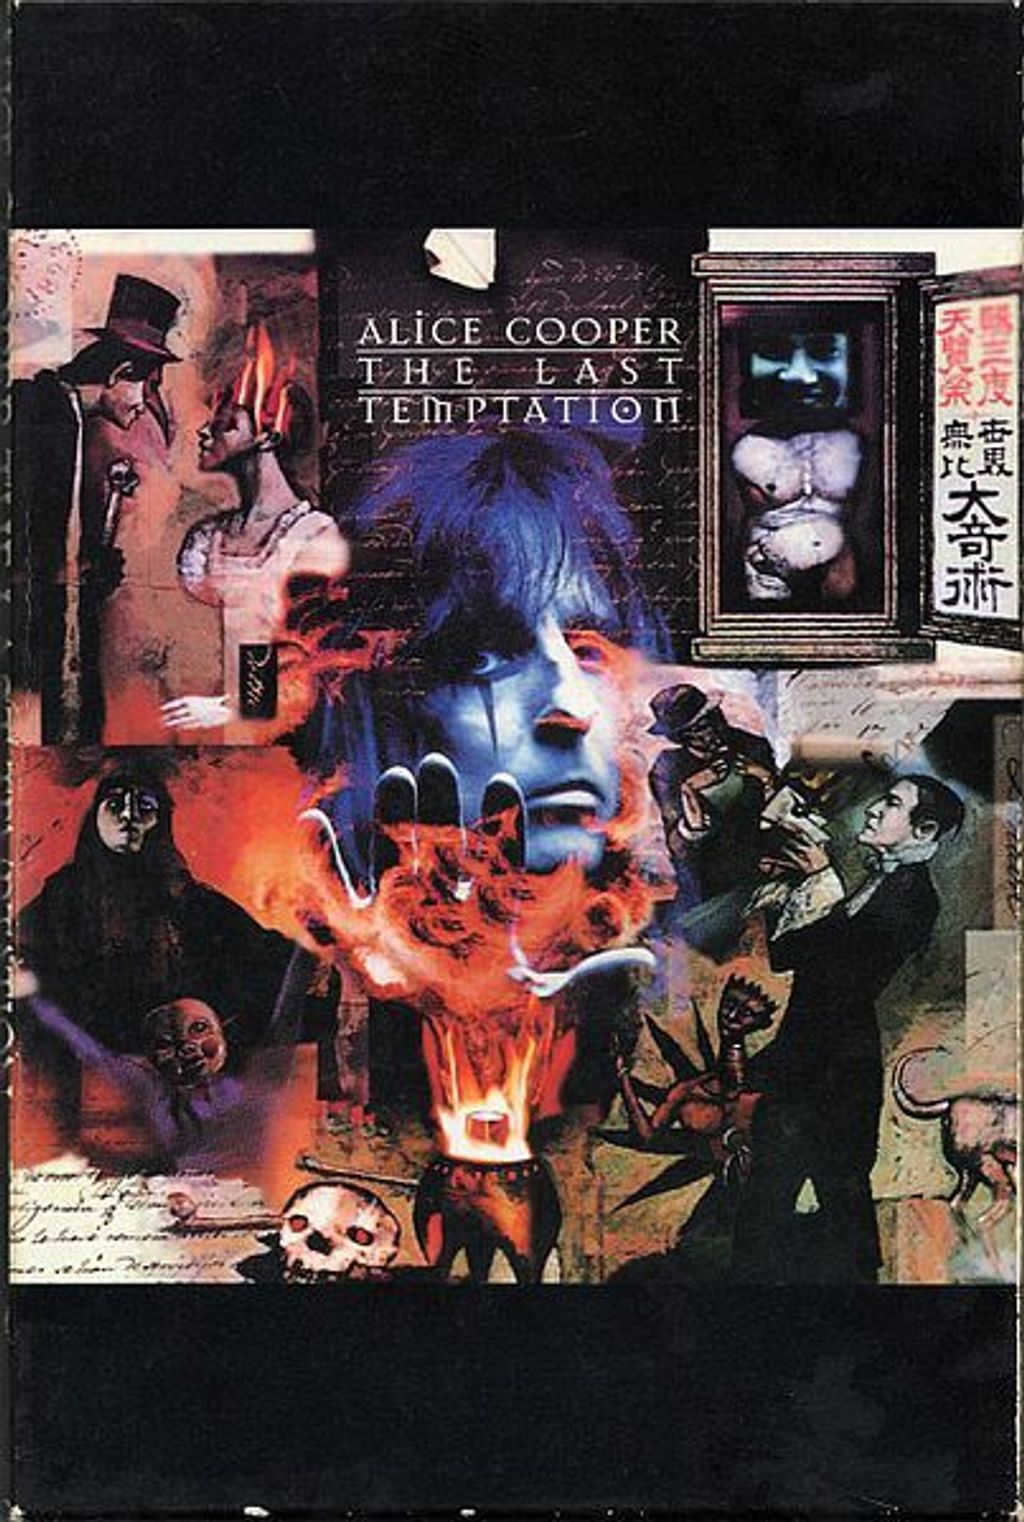 (Used) ALICE COOPER The Last Temptation (Limited Special Edition Box Set with Comic Book) 2CD